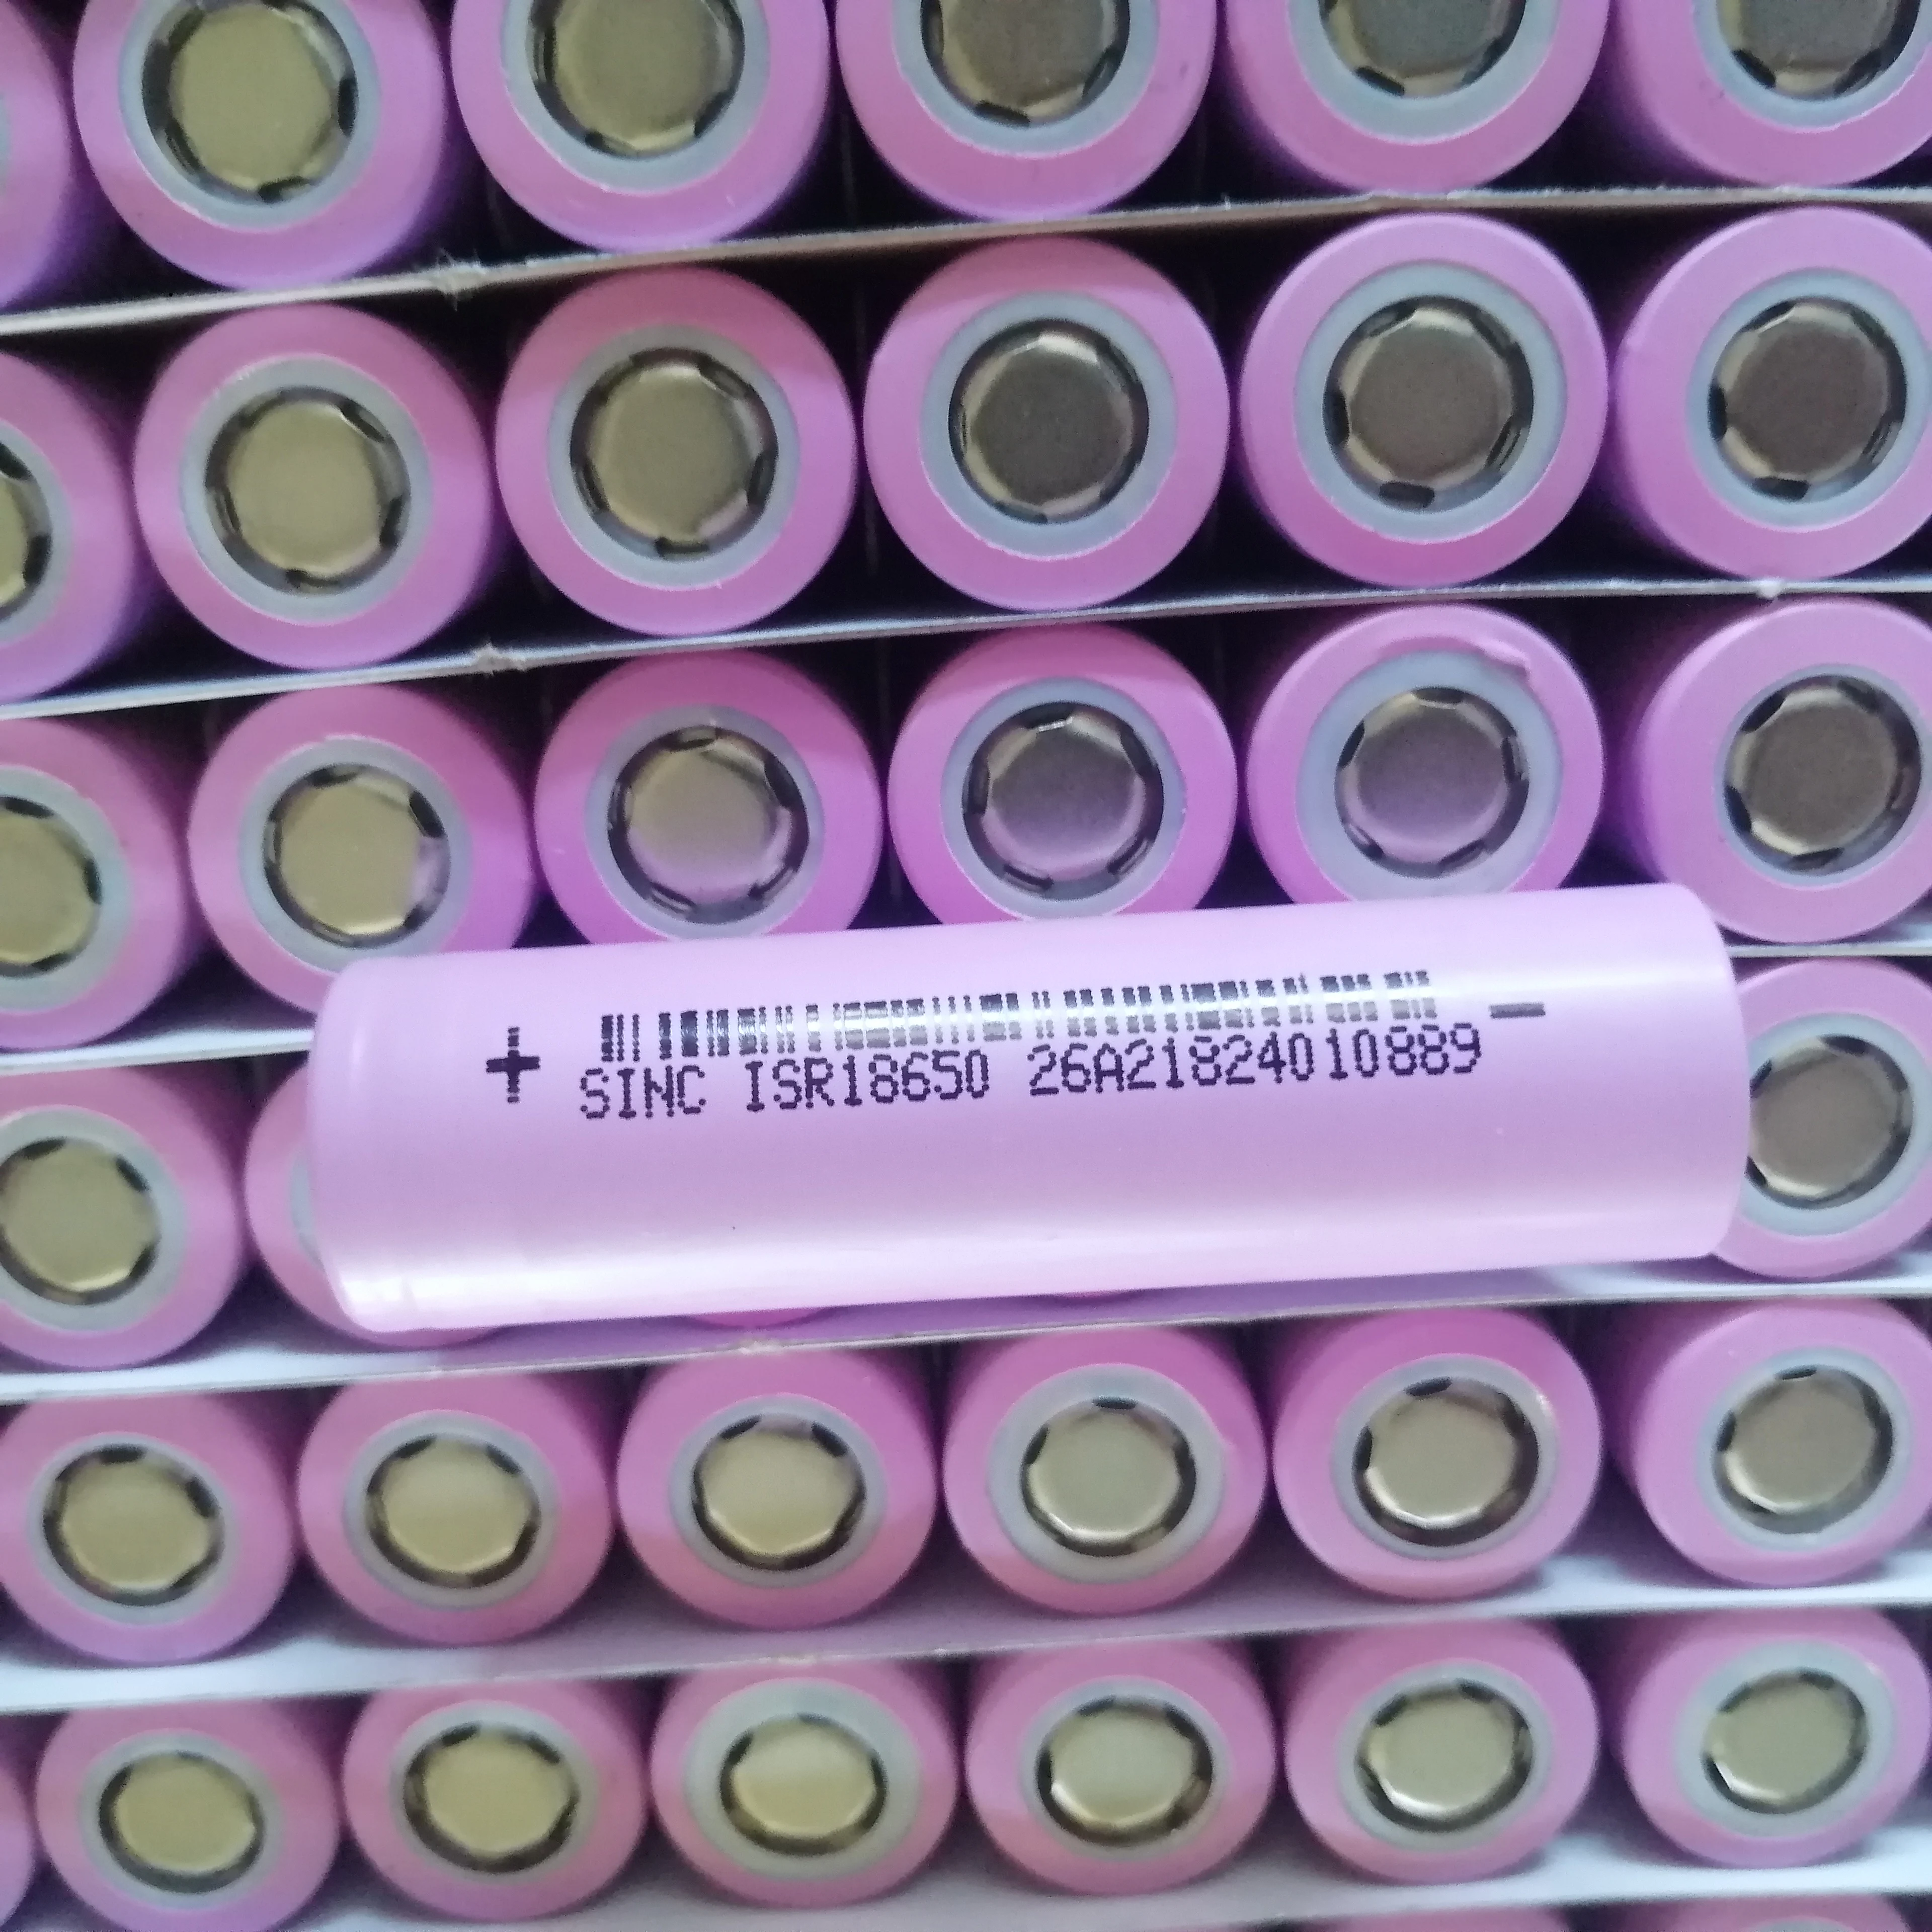 Sinc cylindrical ISR18650 3.7v 2600mAh lithium ion batteri with BIS certificate